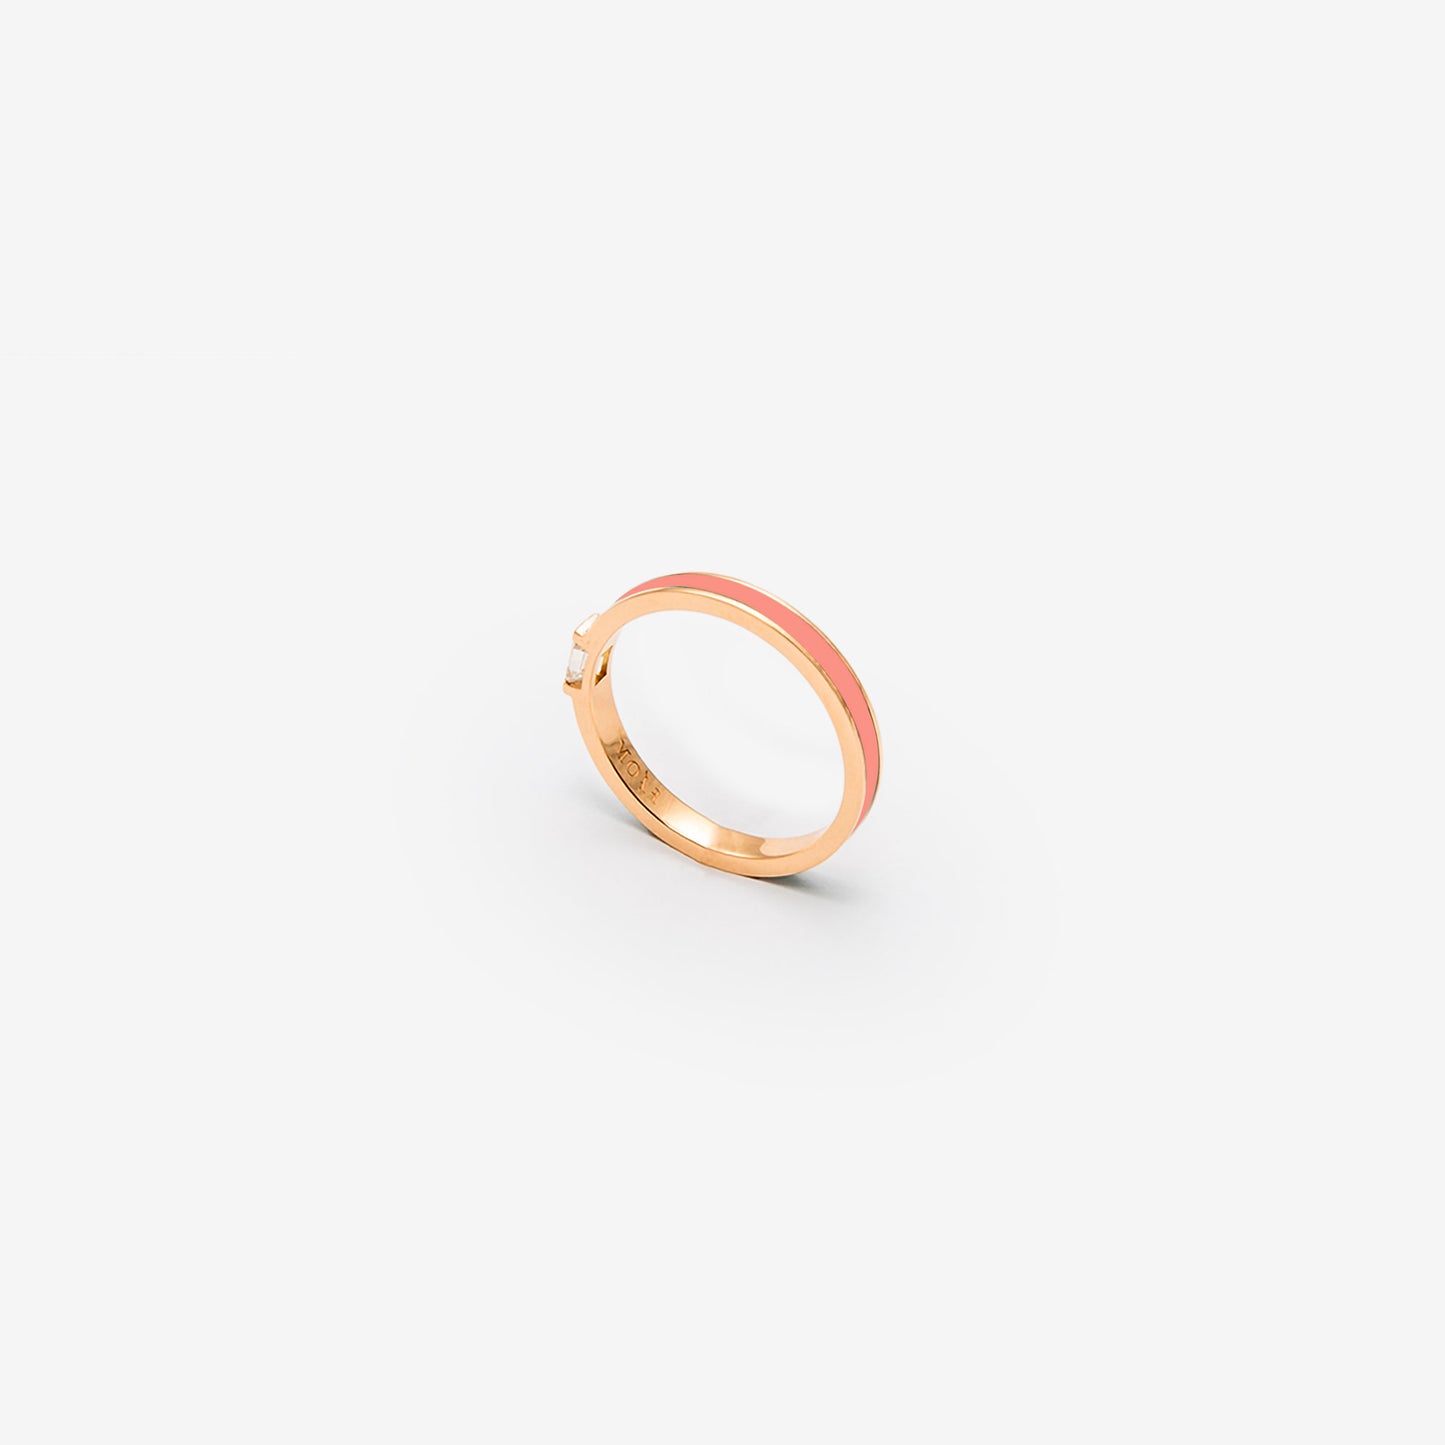 Rose gold band ring with salmon pink enamel and diamond